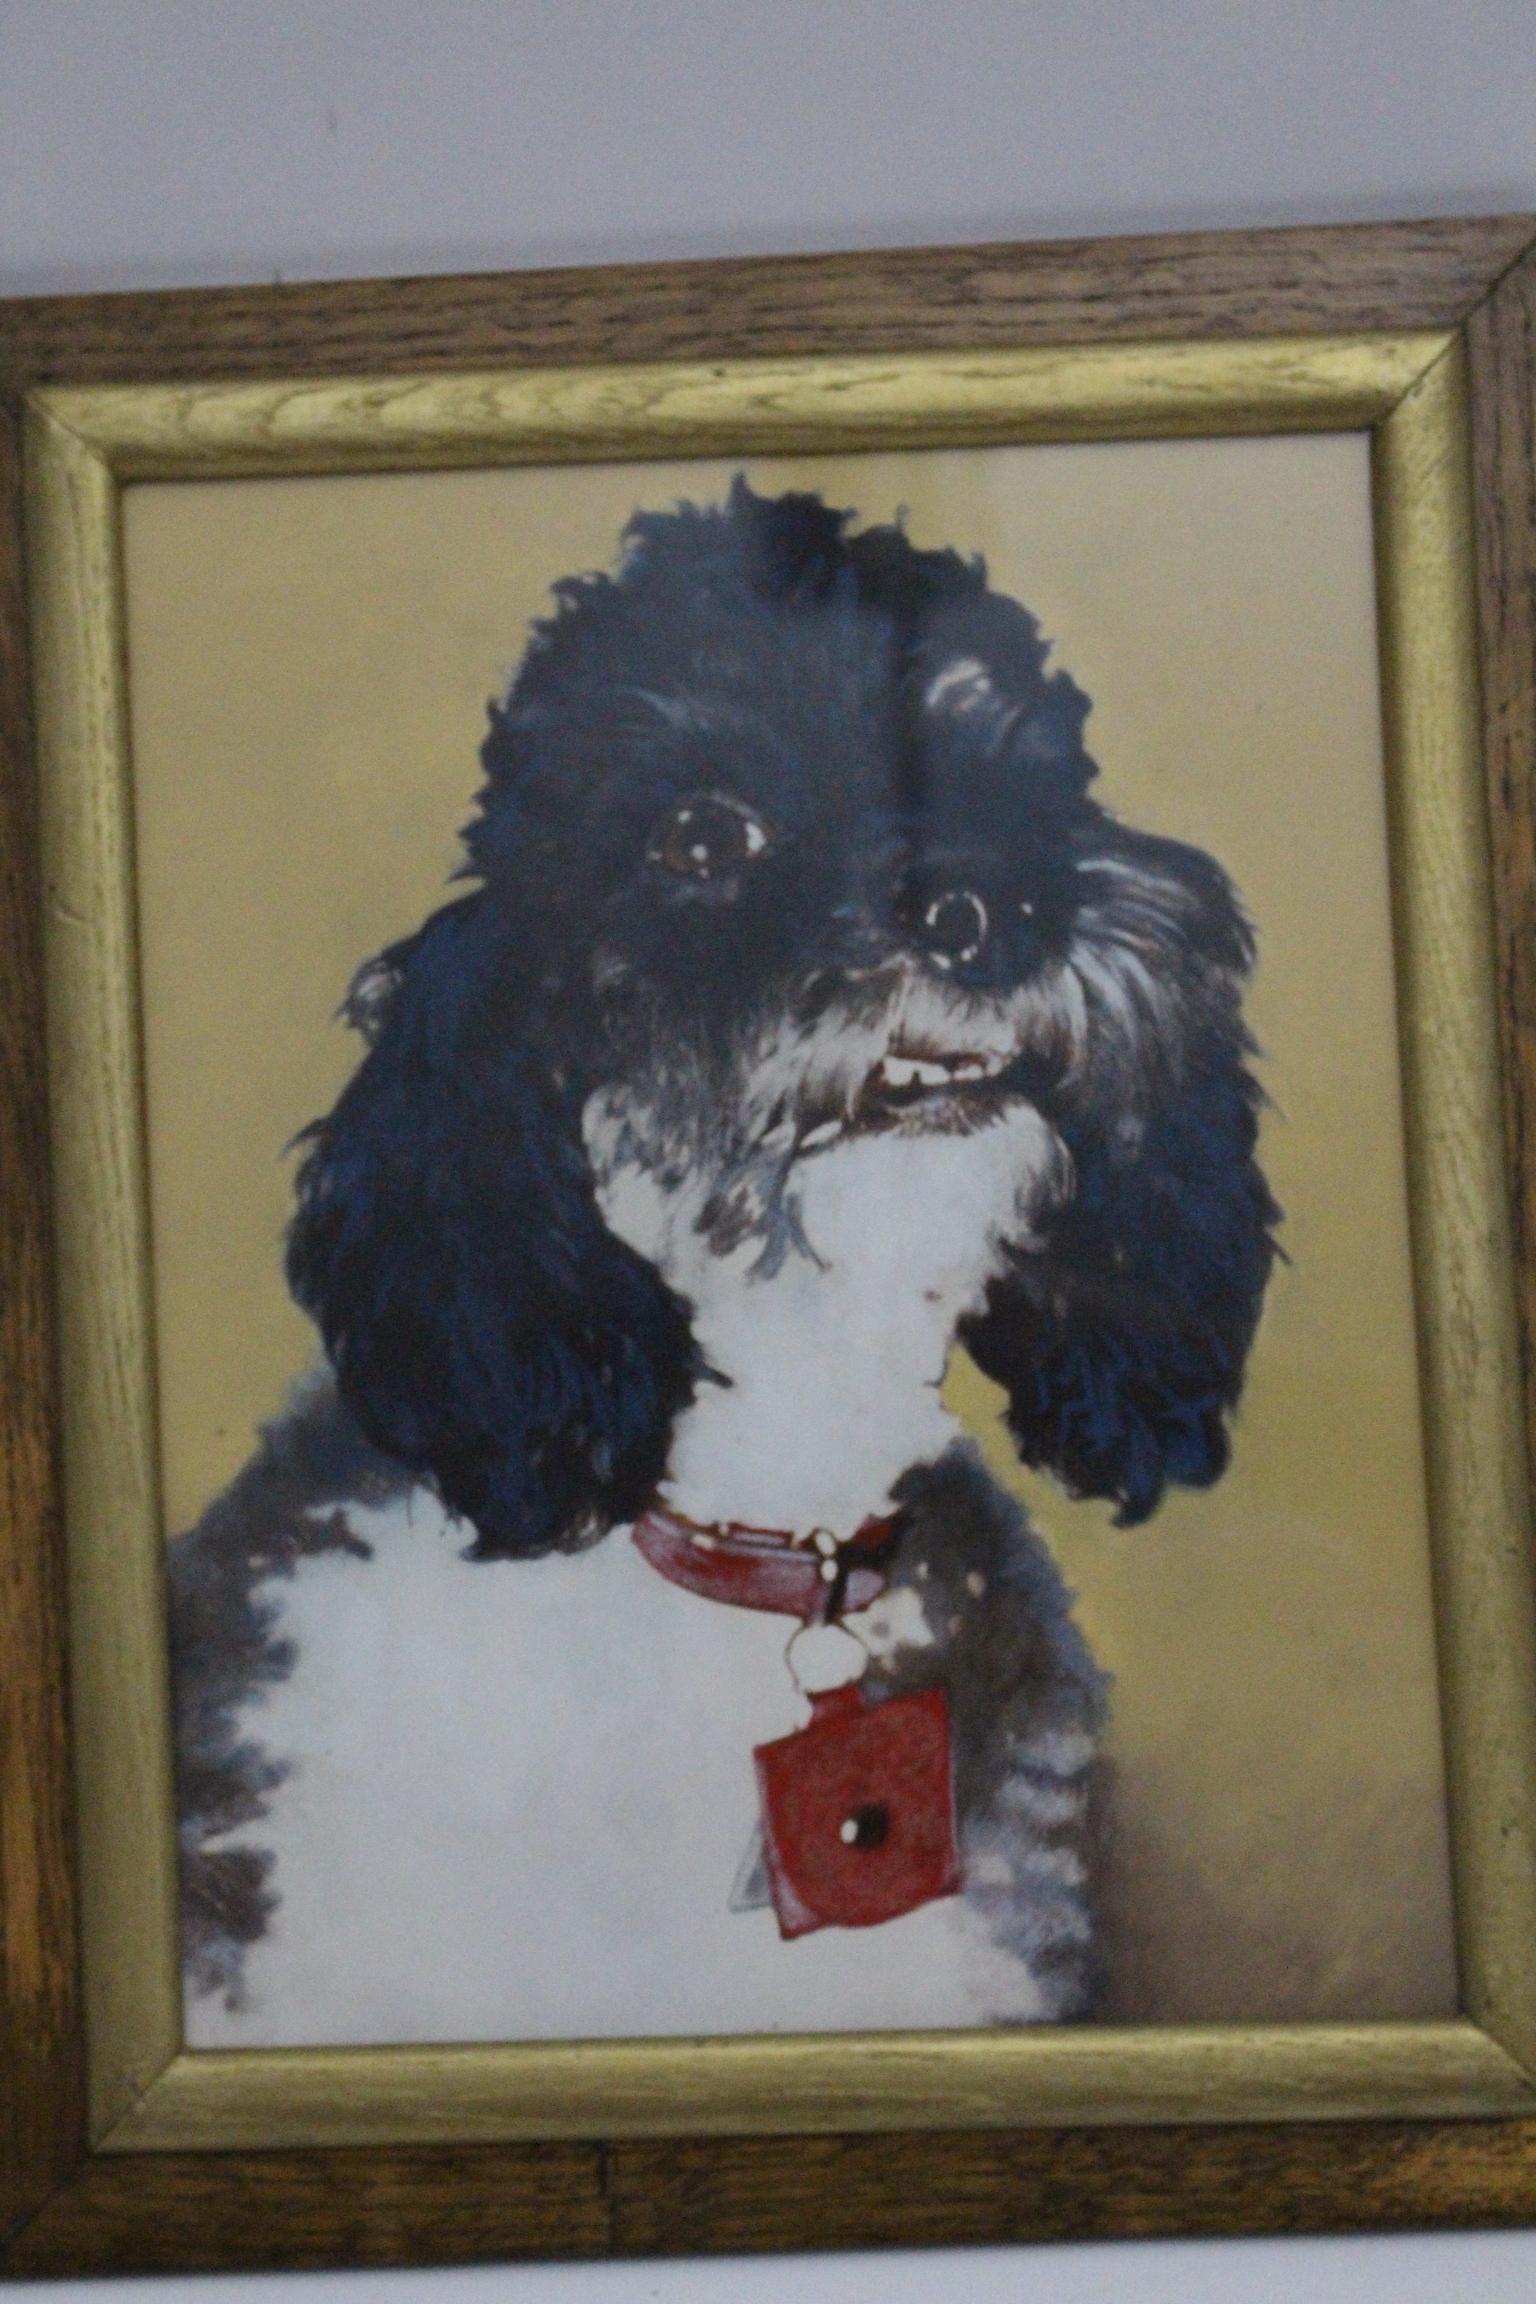 This painting shows a poodle motif in mixed-media behind glass.
It is framed with an oakwood frame with golden stripes.
The vintage condition is very good.
Approximate measures:
Width 35 cm
Depth 2 cm
Height 41 cm.